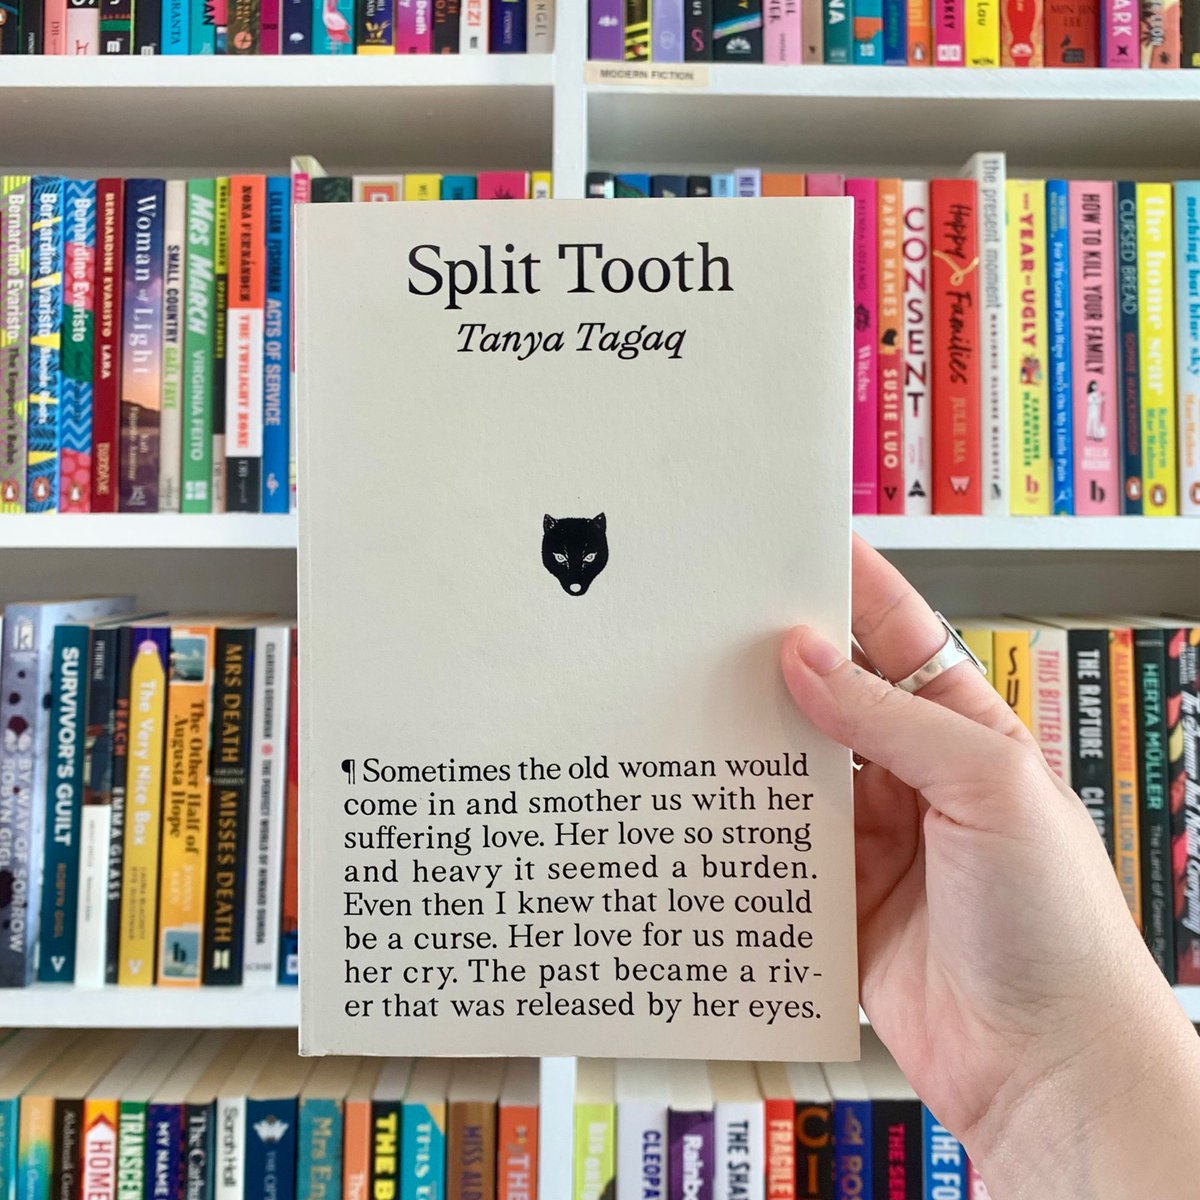 Salomée's review of Split Tooth by Tanya Tagaq💫 'A powerful exploration of trauma and the conflicted gritty emotions someone can feel when violence is at the centre of their existence. An unforgettable voice of the Indigenous literary landscape. Disturbing, surreal, unsettling.'